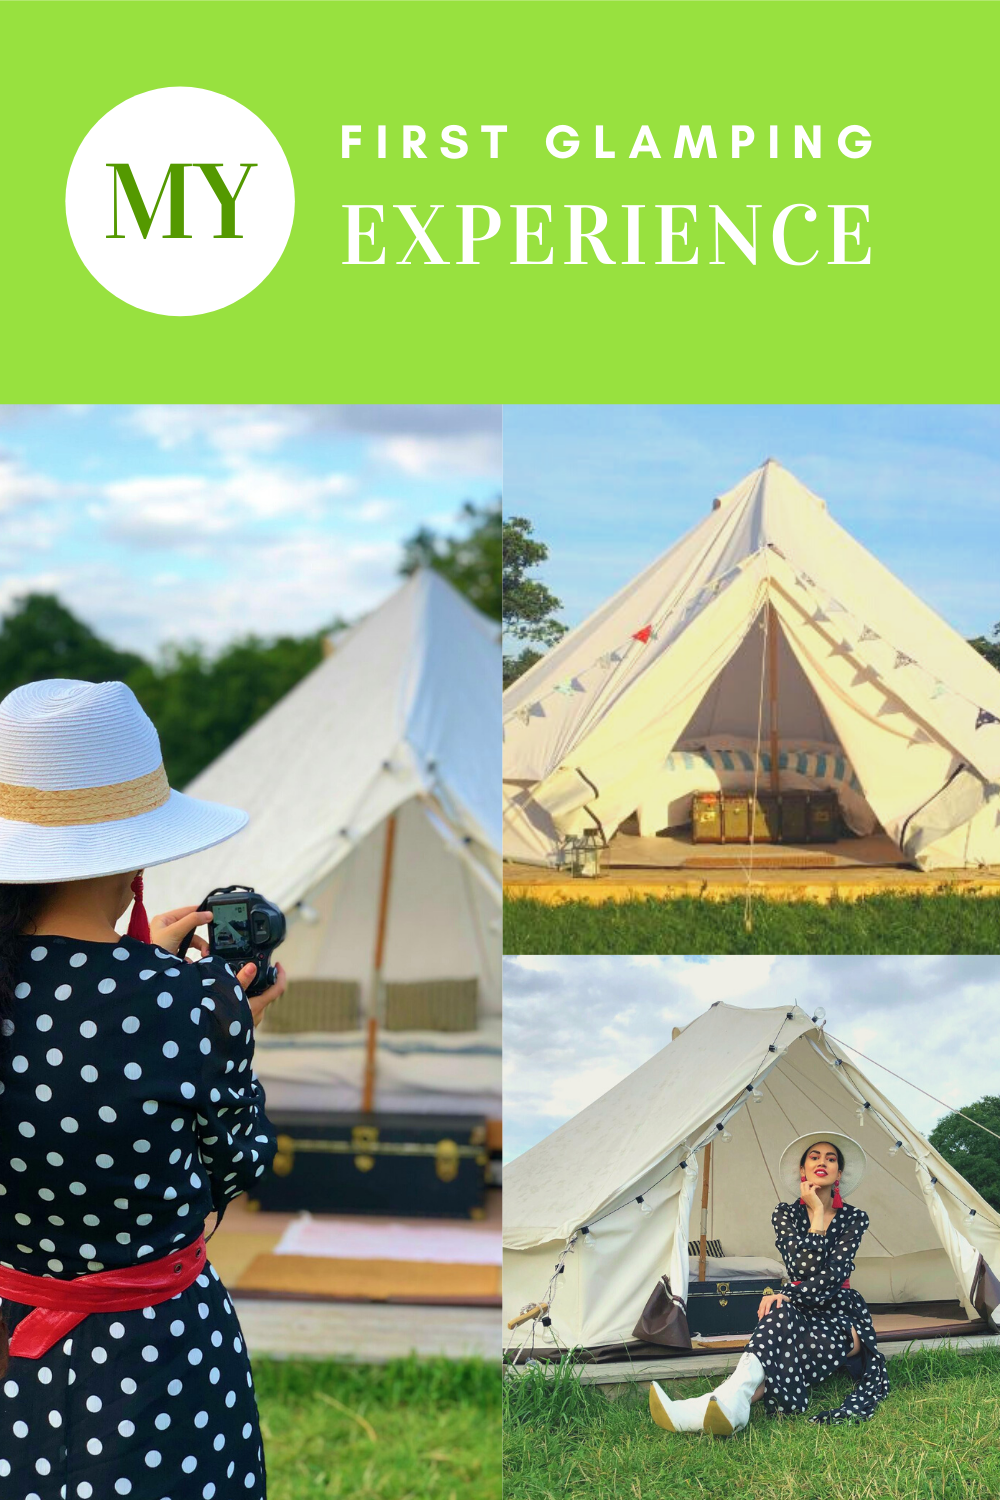 <img src="ana.jpg" alt="my first glamping experience"/> 